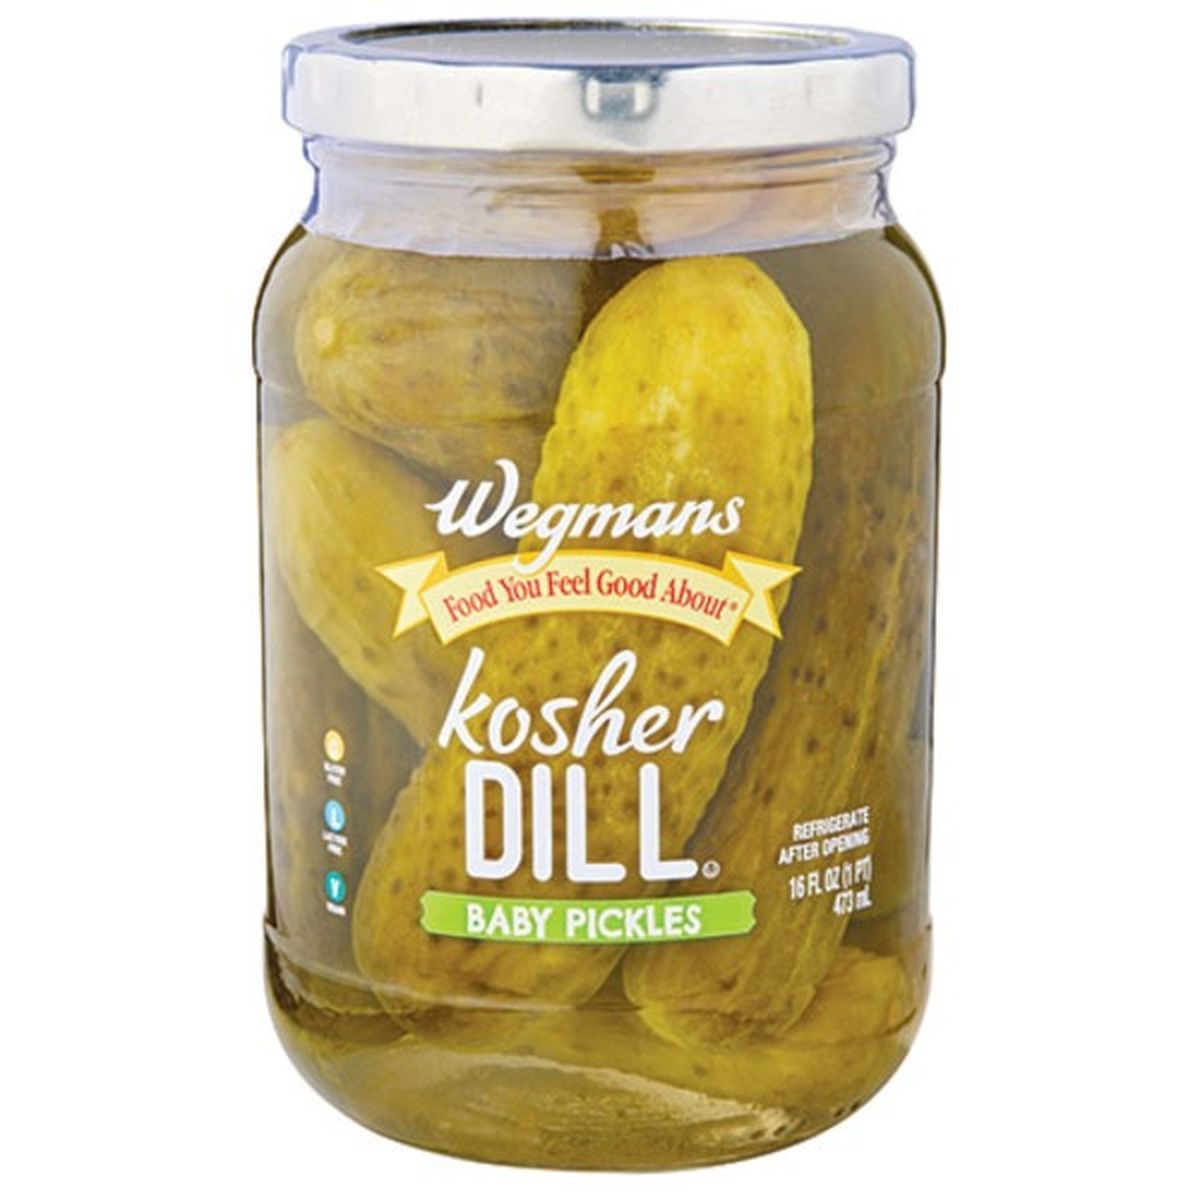 Calories in Wegmans Kosher Dill Baby Pickles